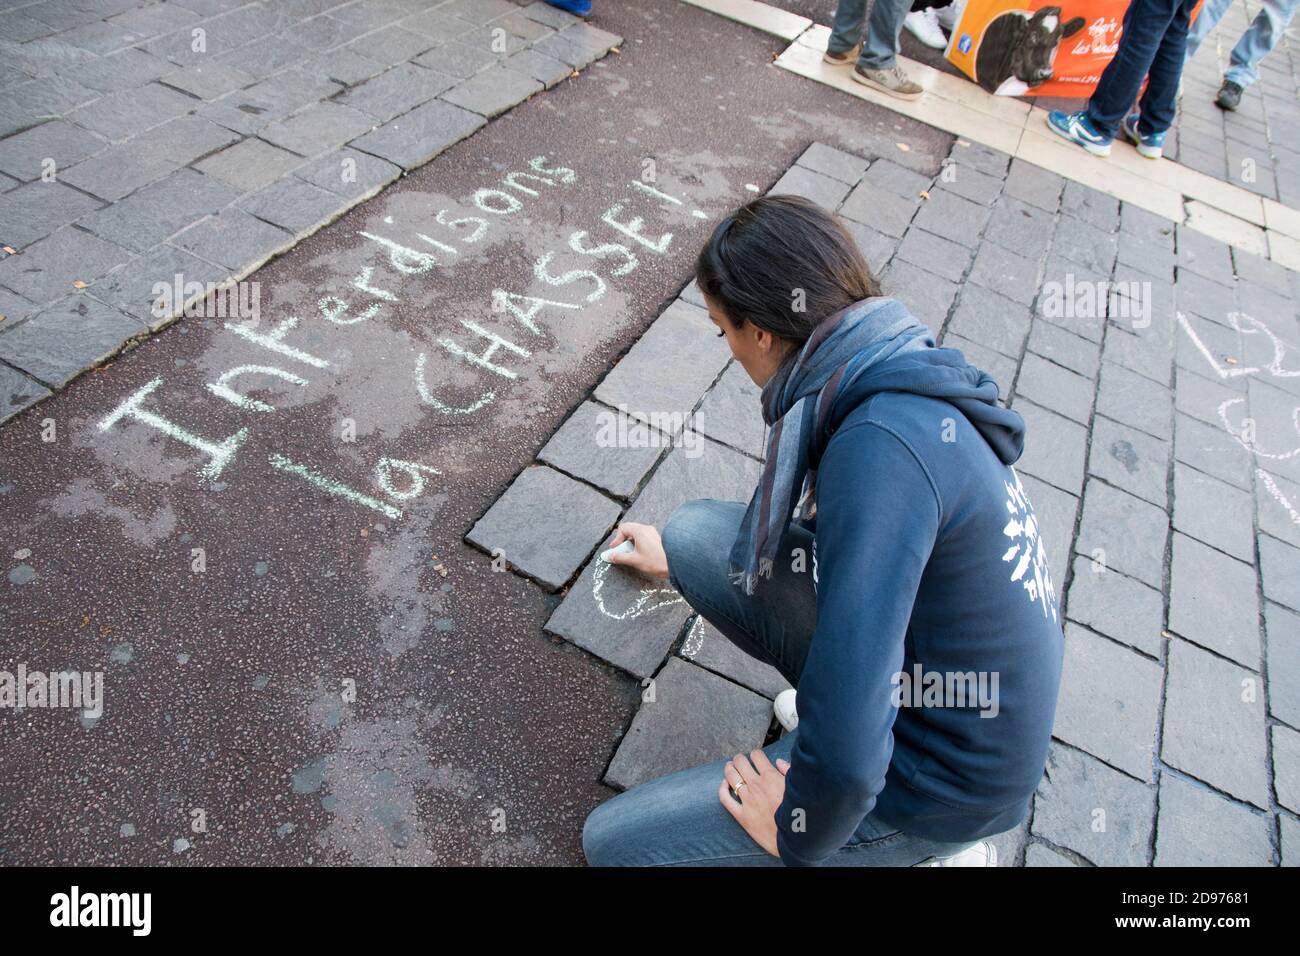 Activist writing a message with chalk on the ground during an anti-hunting demonstration, Paris, France Stock Photo